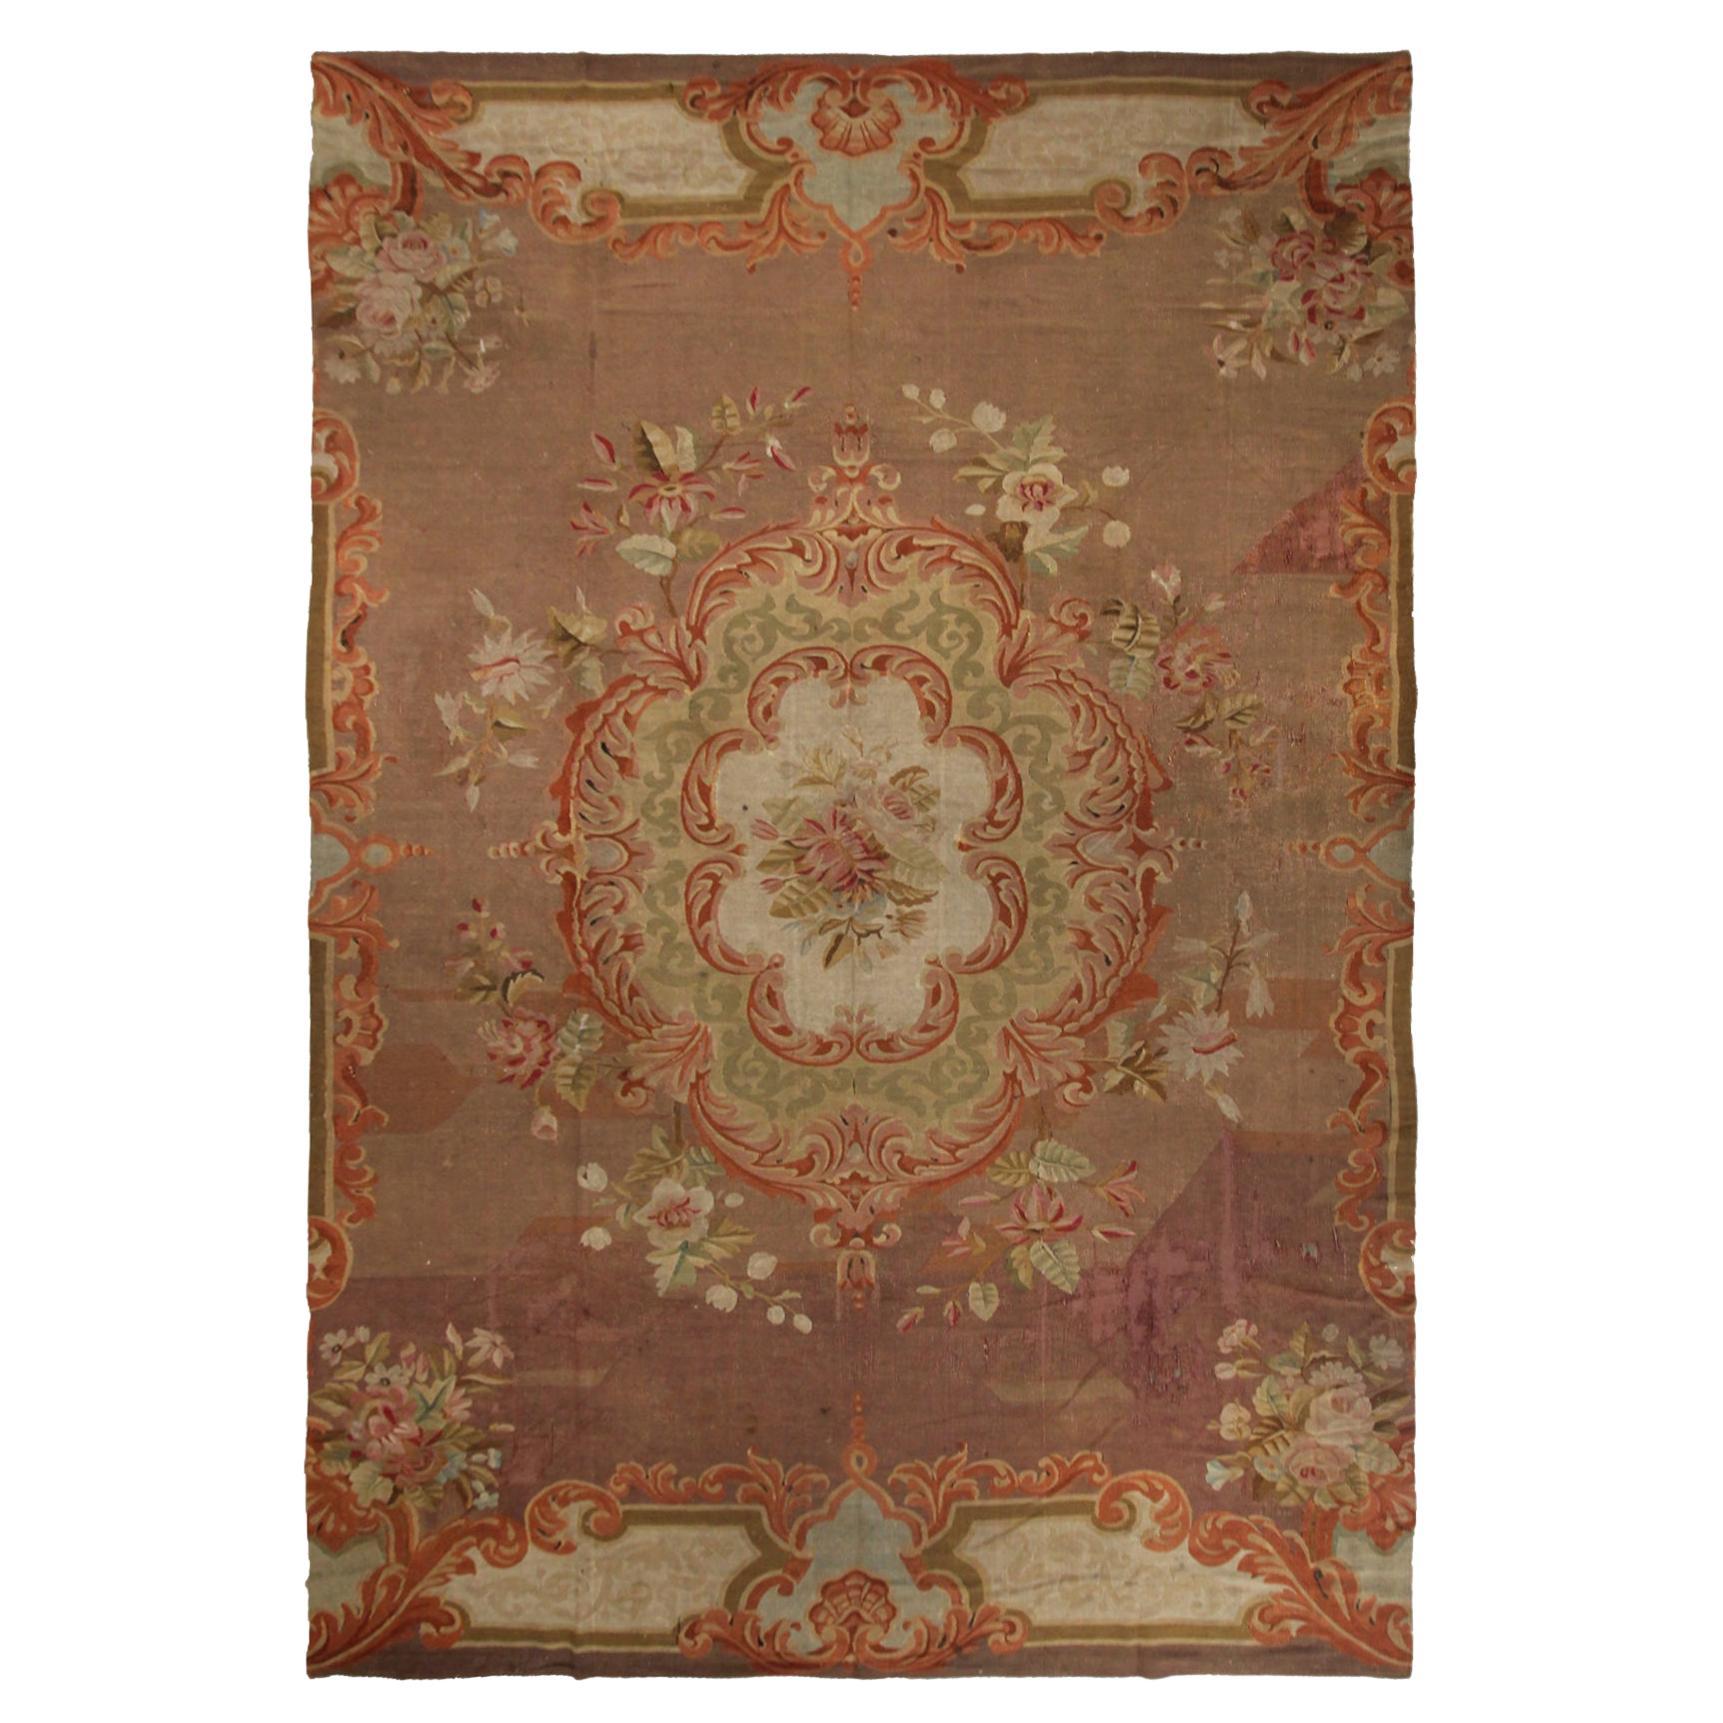 Antique French Aubusson Rug Handwoven French Rug Pre-1900 Charles X